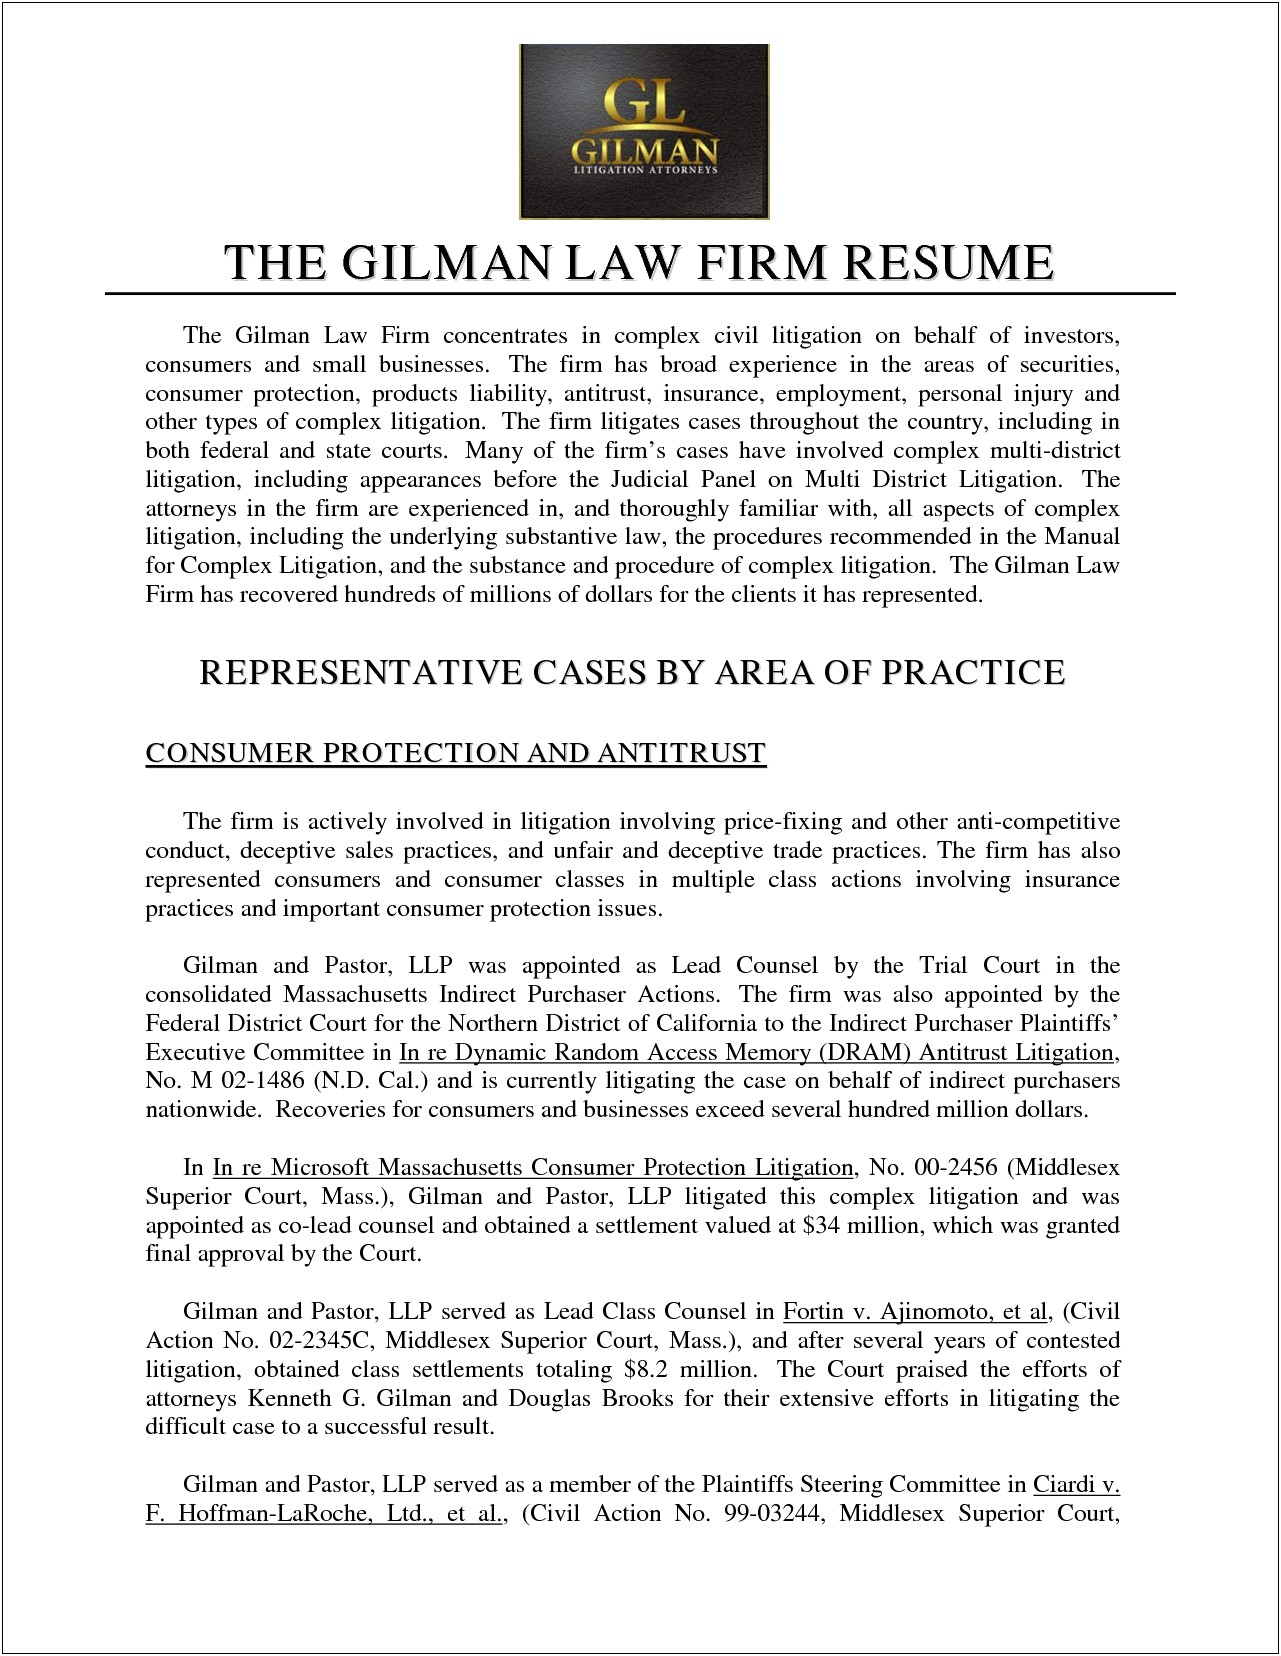 Sample Resume About Personal Injury Attorney